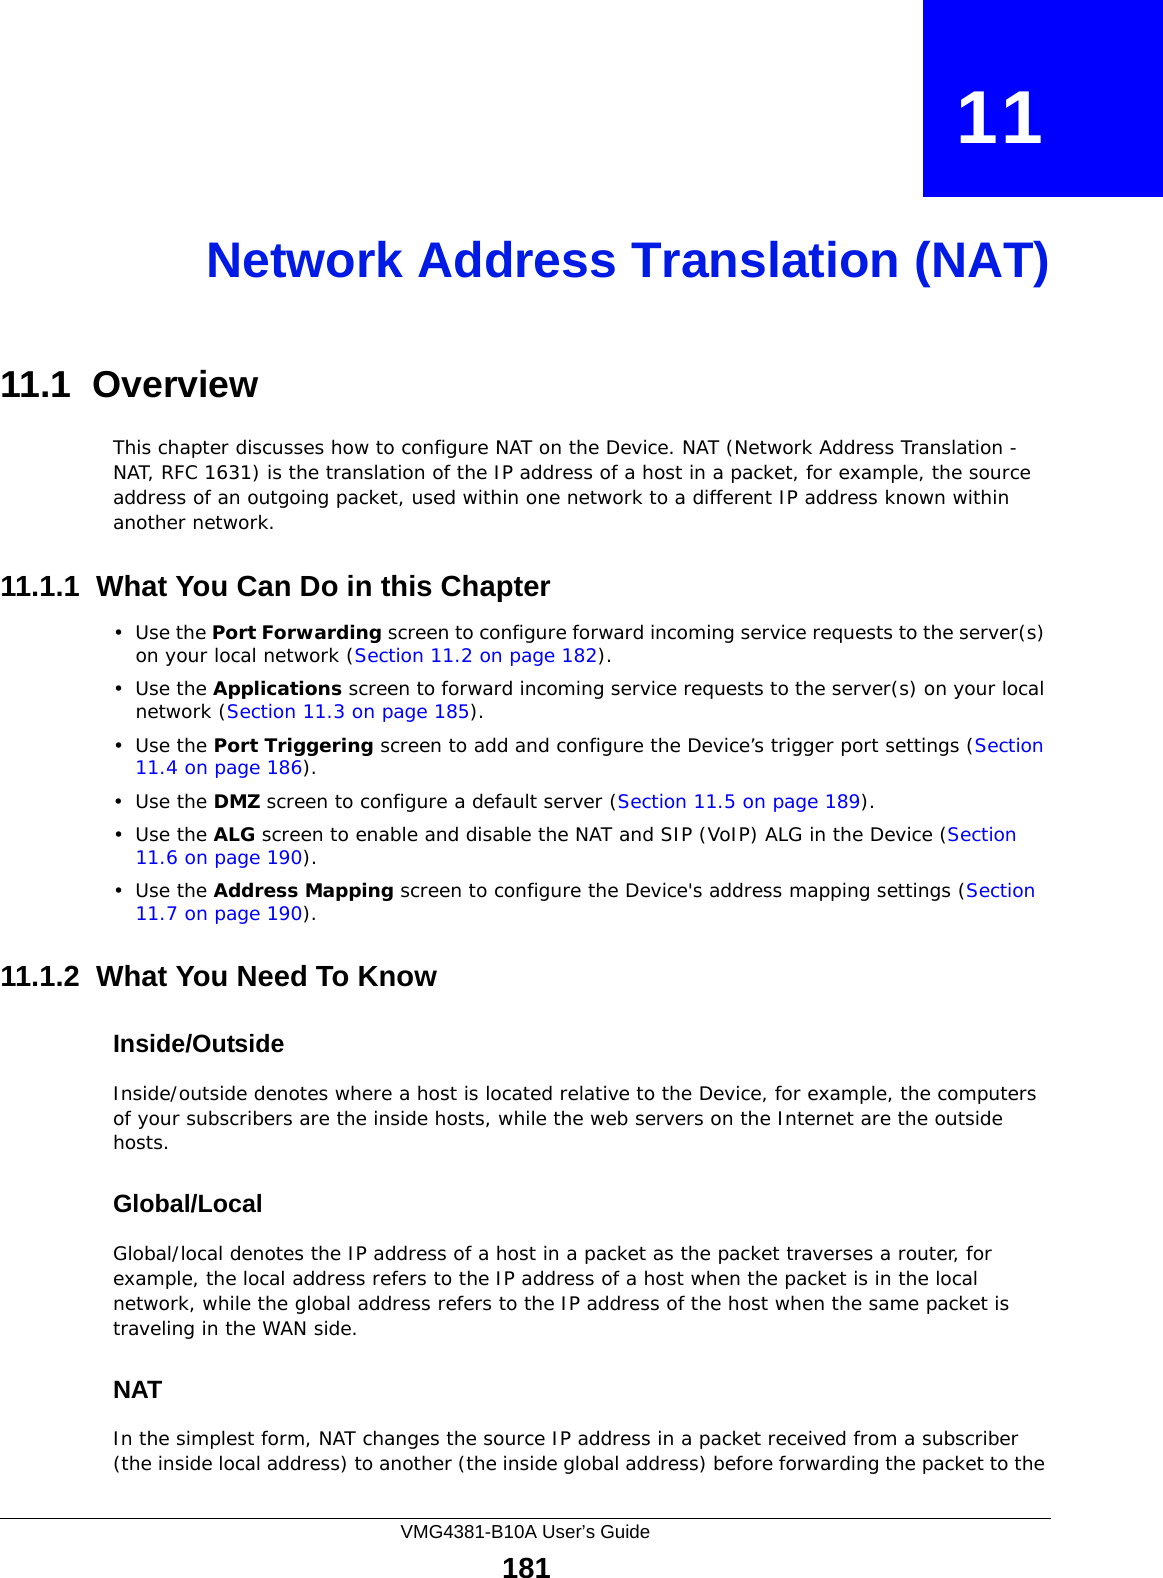 VMG4381-B10A User’s Guide181CHAPTER   11Network Address Translation (NAT)11.1  OverviewThis chapter discusses how to configure NAT on the Device. NAT (Network Address Translation - NAT, RFC 1631) is the translation of the IP address of a host in a packet, for example, the source address of an outgoing packet, used within one network to a different IP address known within another network.11.1.1  What You Can Do in this Chapter•Use the Port Forwarding screen to configure forward incoming service requests to the server(s) on your local network (Section 11.2 on page 182). •Use the Applications screen to forward incoming service requests to the server(s) on your local network (Section 11.3 on page 185).•Use the Port Triggering screen to add and configure the Device’s trigger port settings (Section 11.4 on page 186).•Use the DMZ screen to configure a default server (Section 11.5 on page 189).•Use the ALG screen to enable and disable the NAT and SIP (VoIP) ALG in the Device (Section 11.6 on page 190).•Use the Address Mapping screen to configure the Device&apos;s address mapping settings (Section 11.7 on page 190). 11.1.2  What You Need To KnowInside/OutsideInside/outside denotes where a host is located relative to the Device, for example, the computers of your subscribers are the inside hosts, while the web servers on the Internet are the outside hosts. Global/LocalGlobal/local denotes the IP address of a host in a packet as the packet traverses a router, for example, the local address refers to the IP address of a host when the packet is in the local network, while the global address refers to the IP address of the host when the same packet is traveling in the WAN side. NATIn the simplest form, NAT changes the source IP address in a packet received from a subscriber (the inside local address) to another (the inside global address) before forwarding the packet to the 